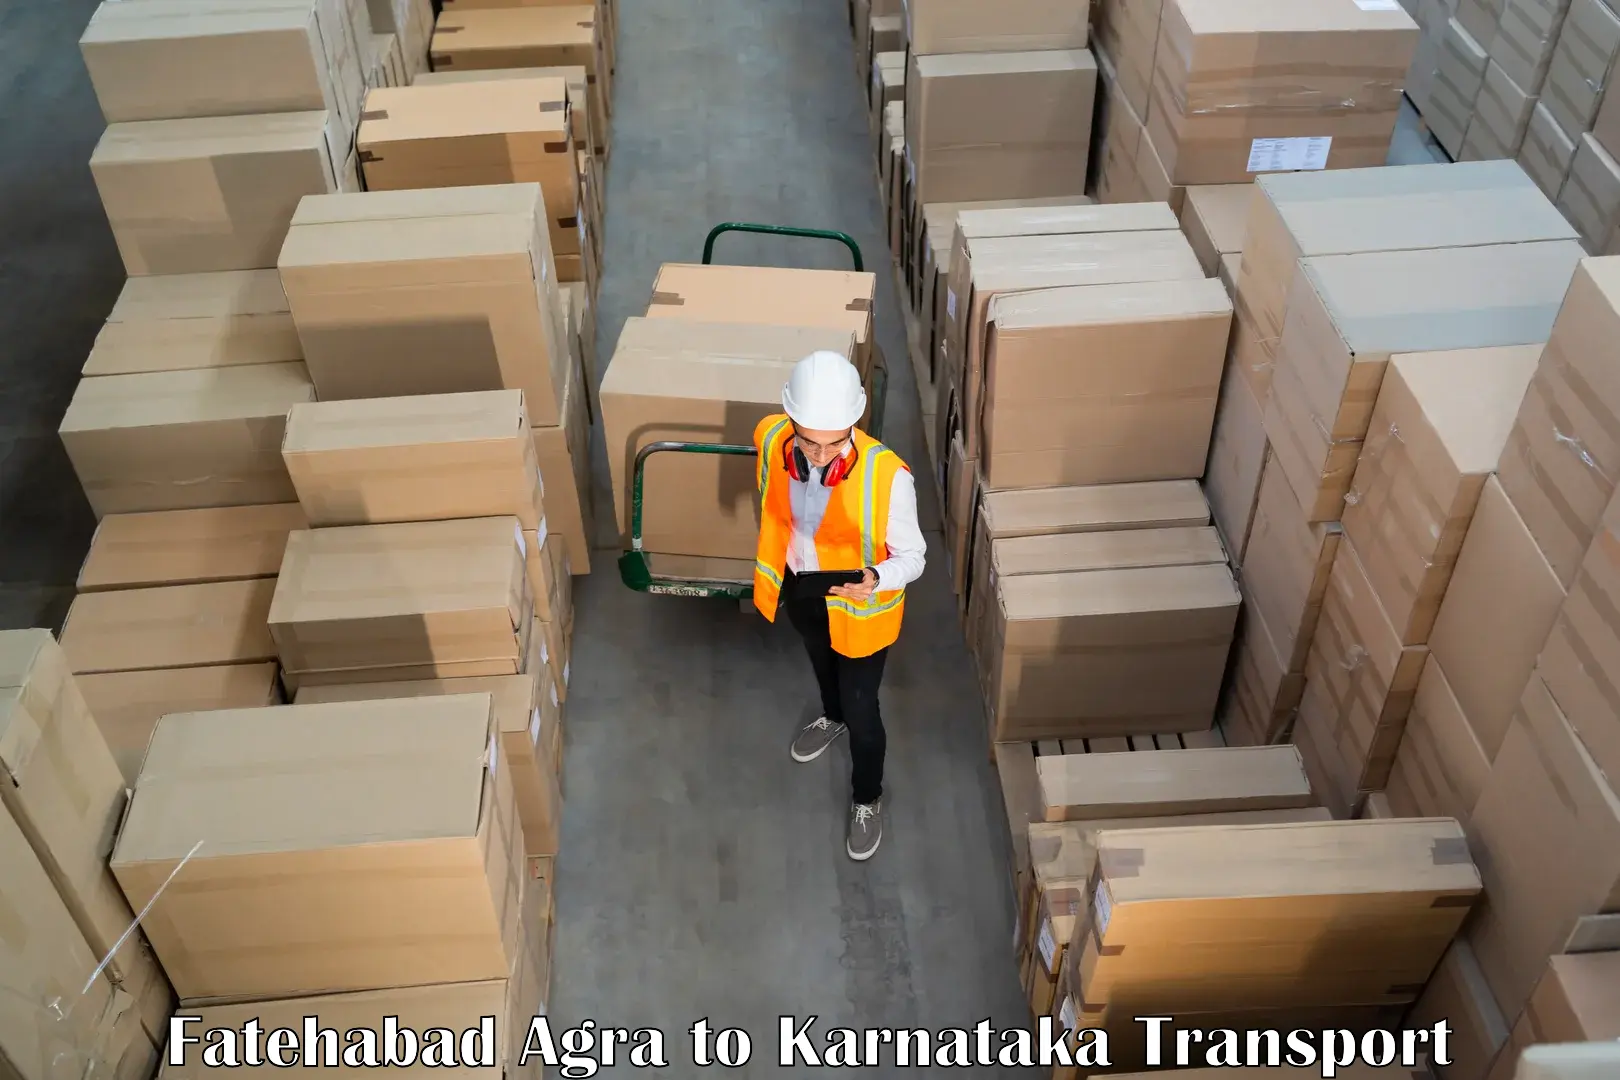 Goods delivery service Fatehabad Agra to Hukkeri